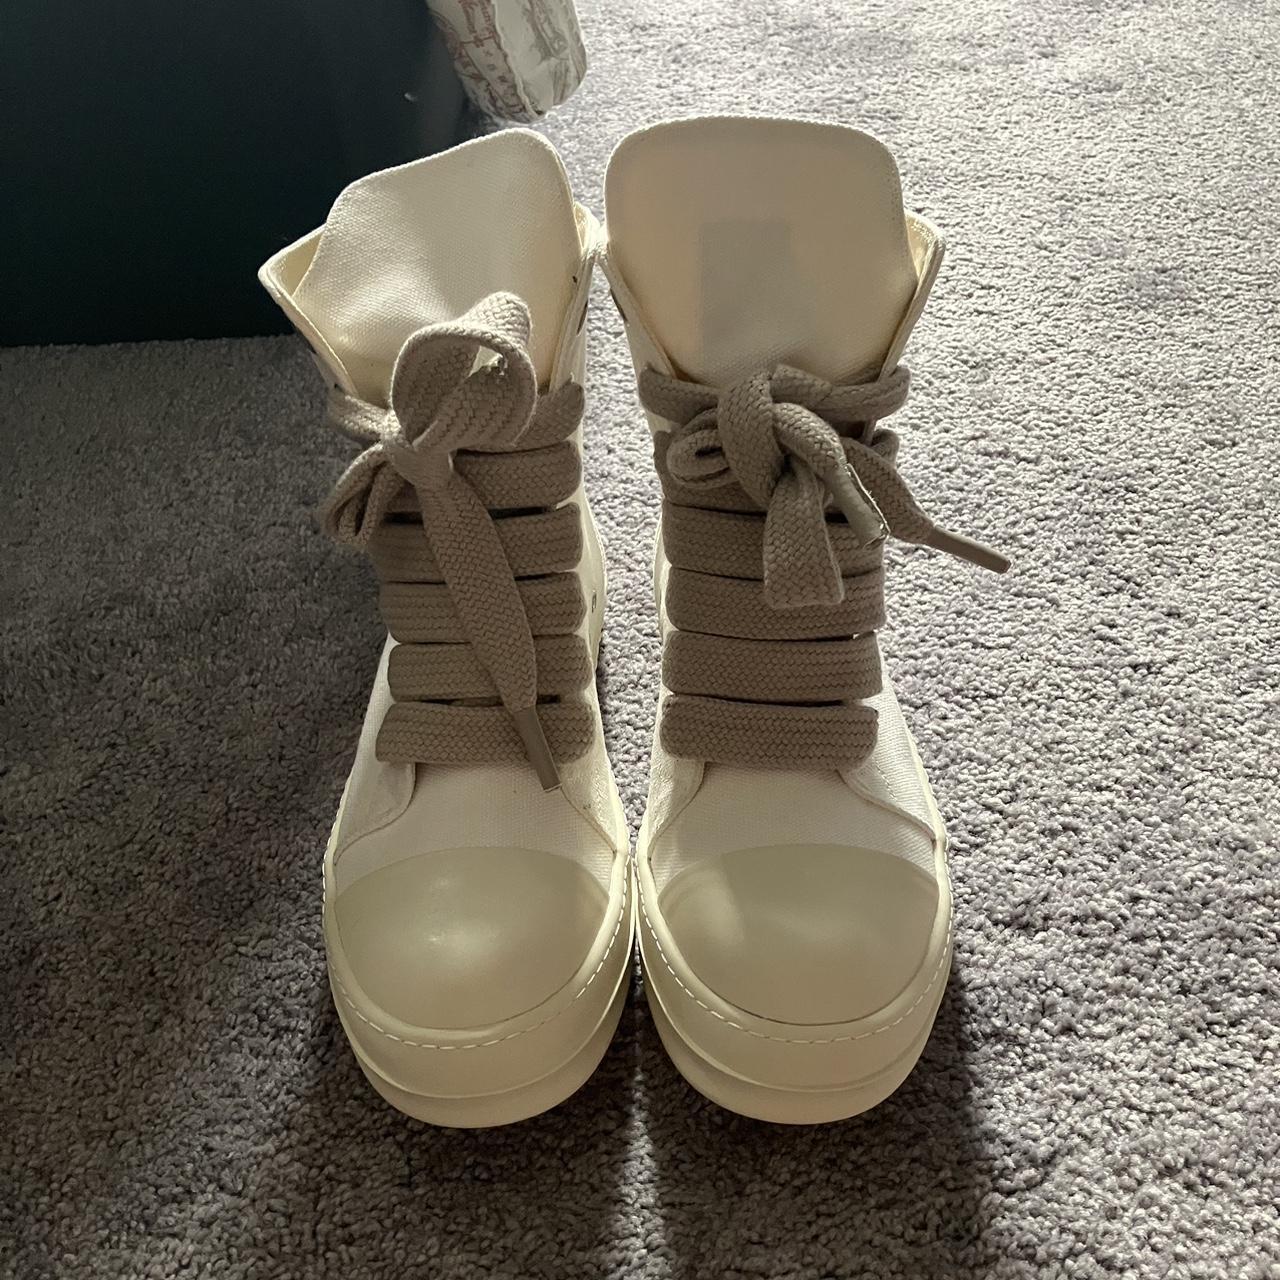 Rick Owens DRKSHDW Men's White and Cream Trainers | Depop